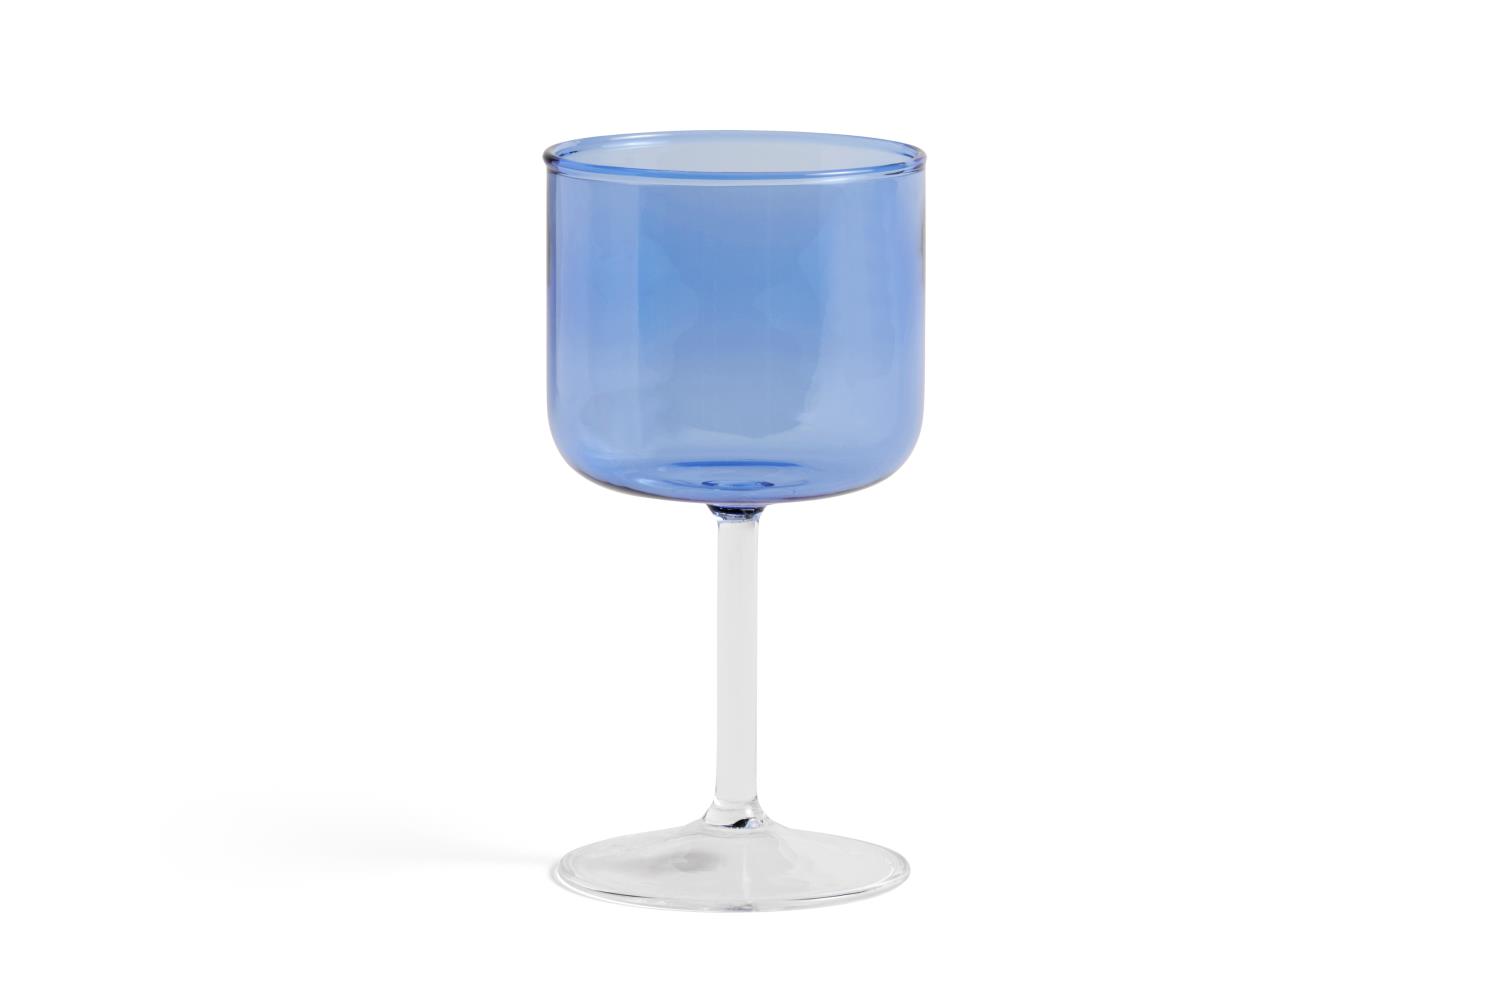 HAY - Tint Wine Glass - Set of 2 - Blue and Clear